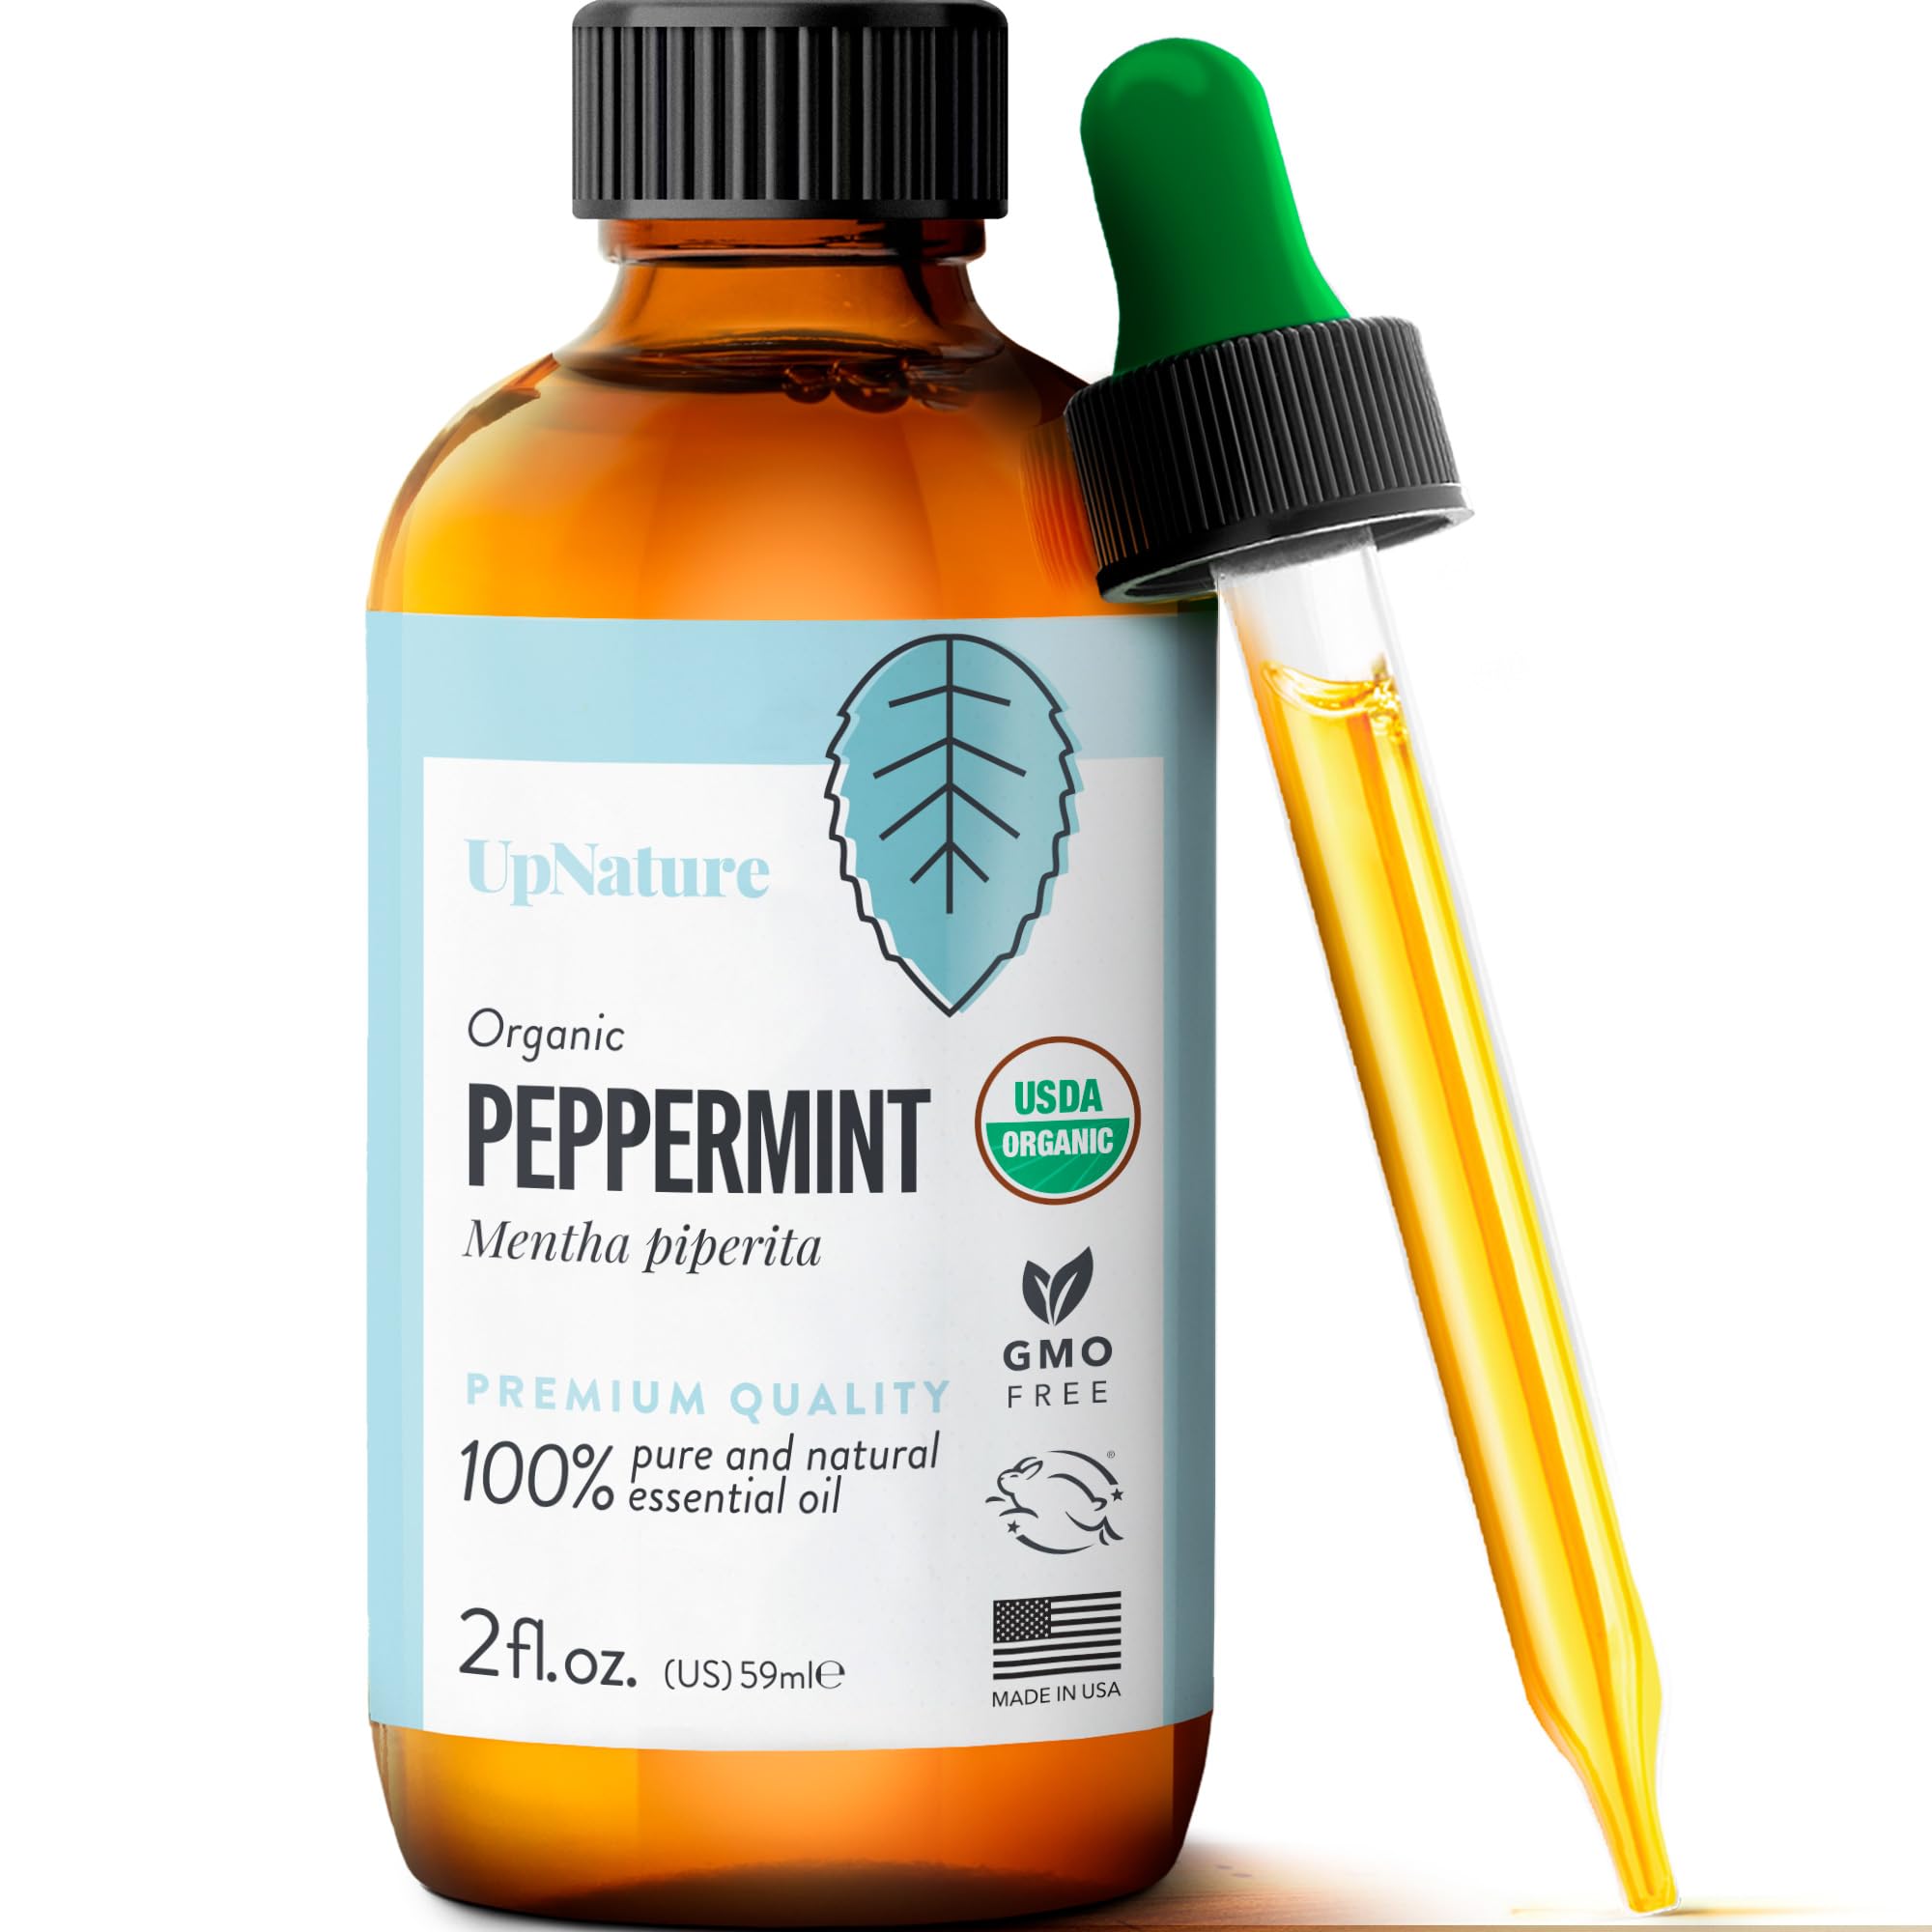 USDA Certified Organic Peppermint Essential Oil 2oz  100% Natural & Pure Peppermint Oil Aromatherapy Oil